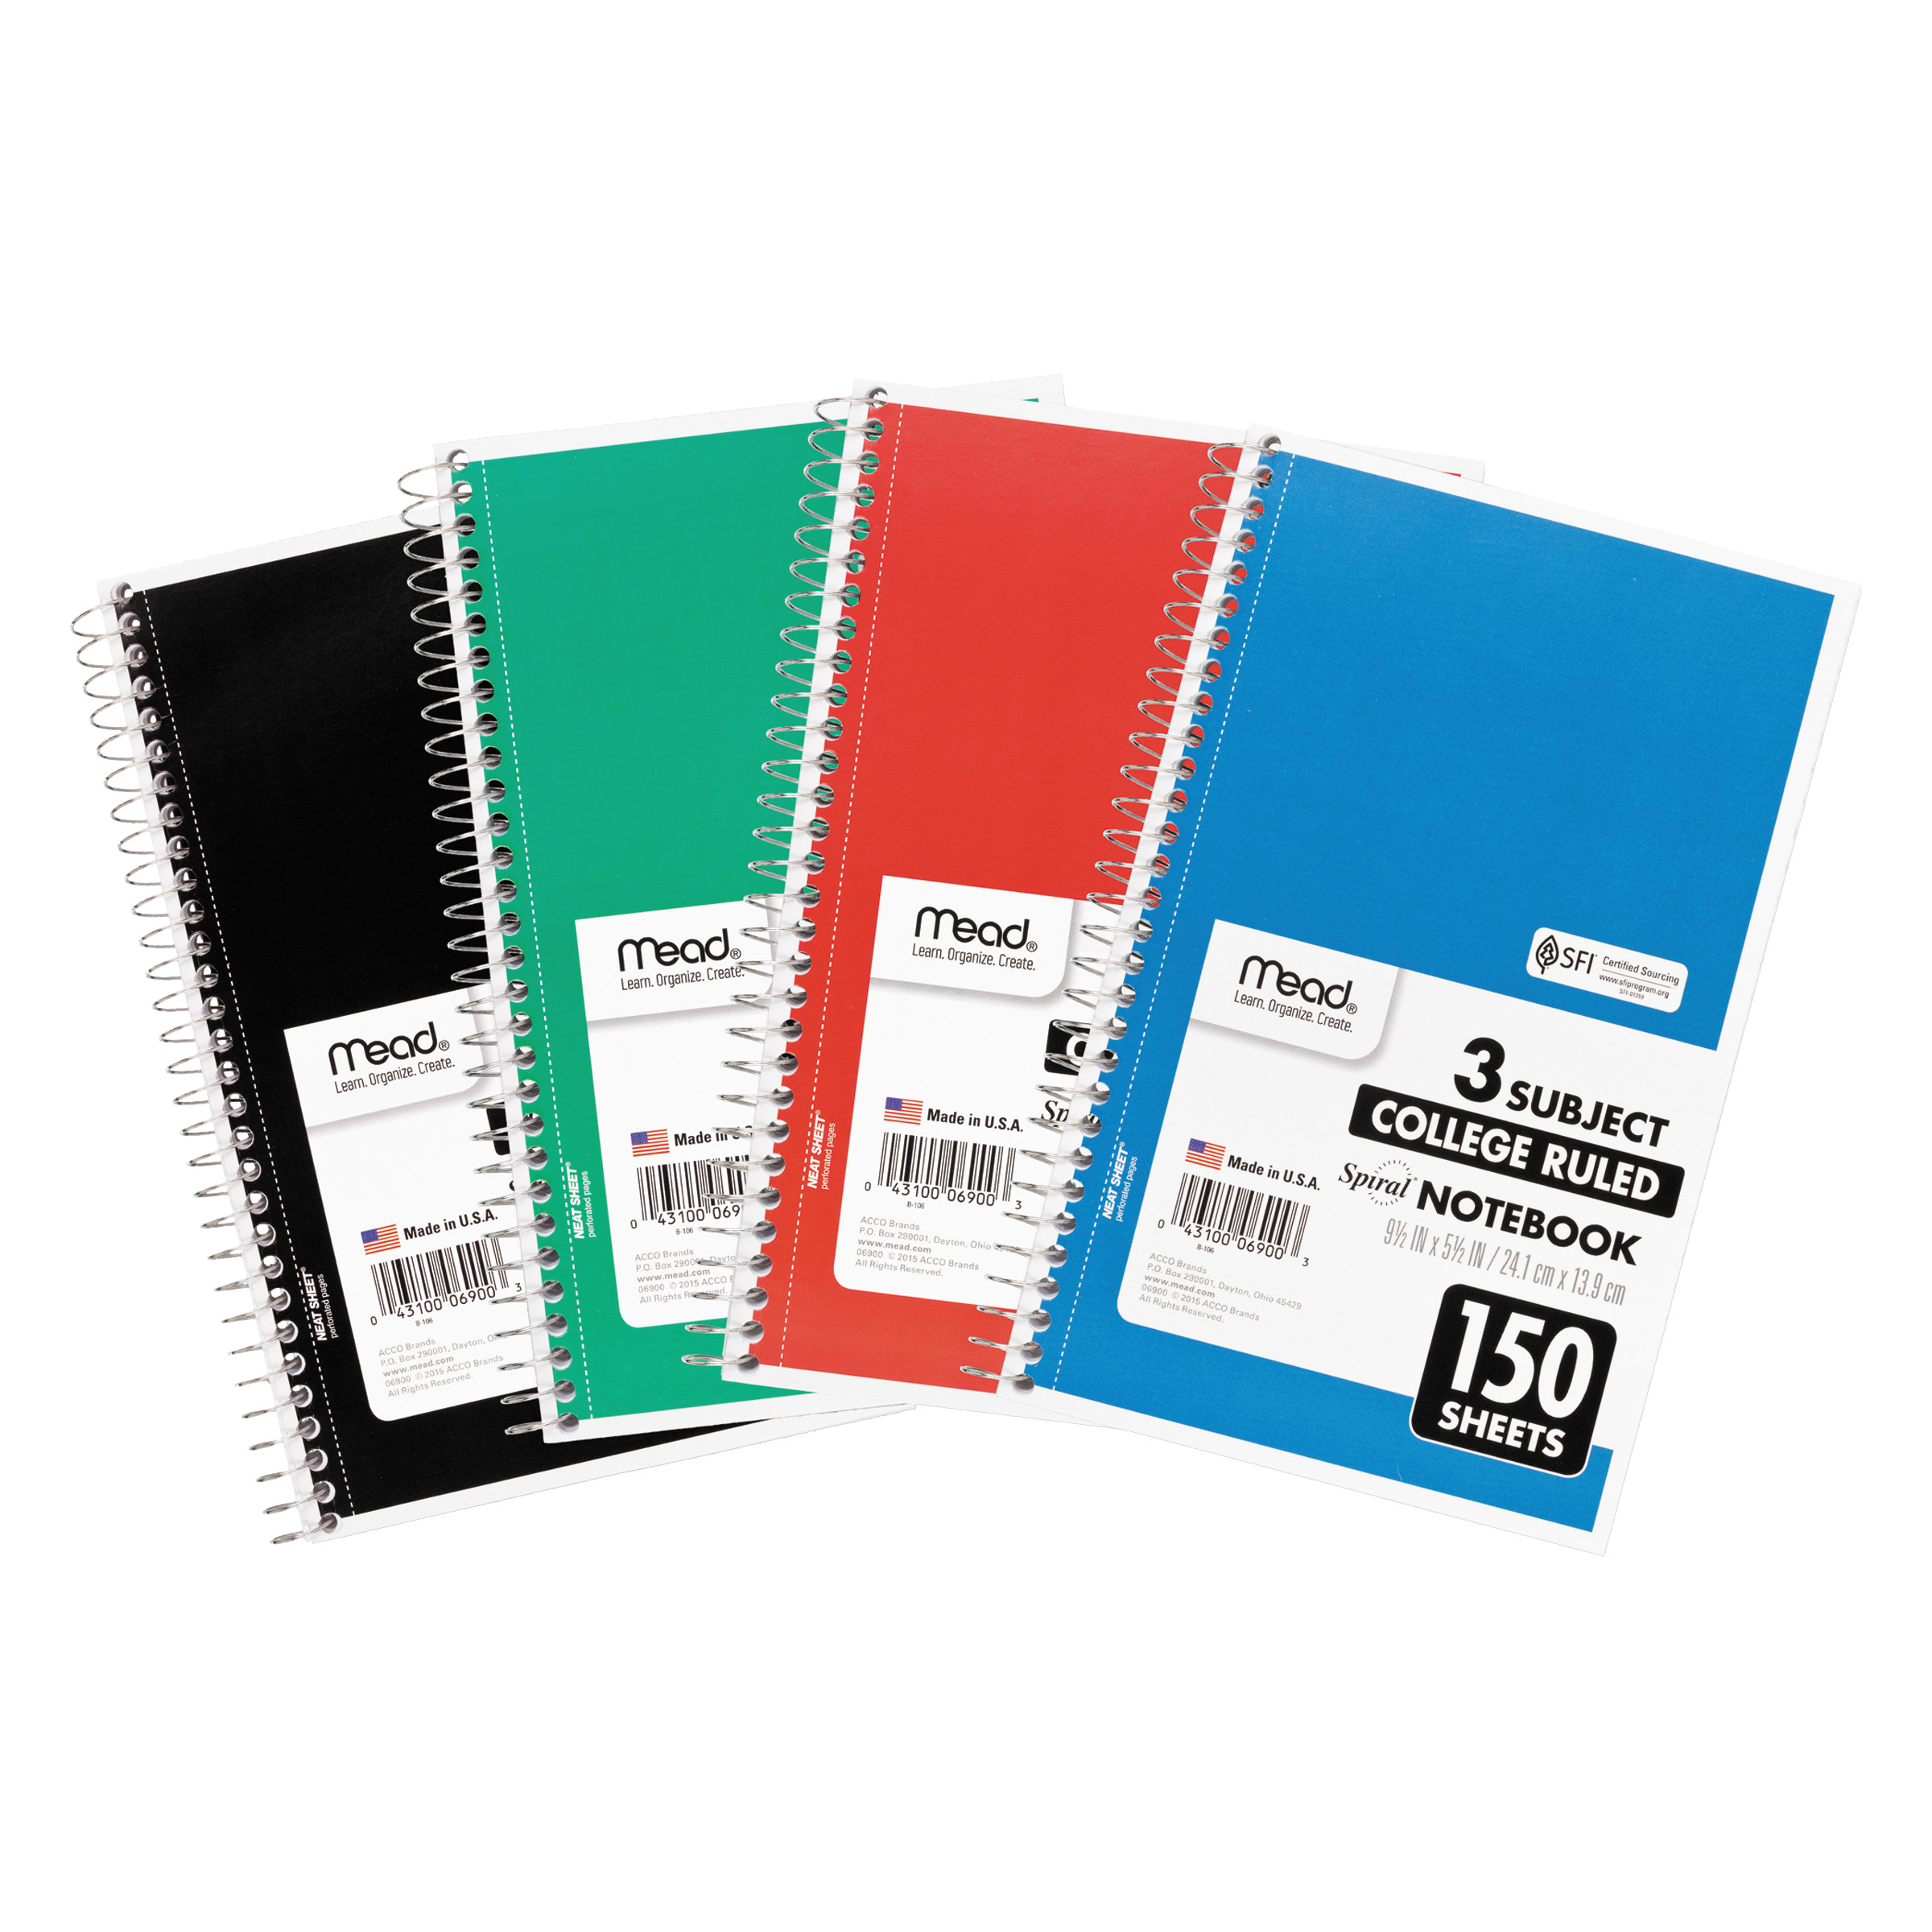 3 PACK Mini Spiral Notebooks Sticky Notes College Ruled Wirebound Notepads 3 x 5